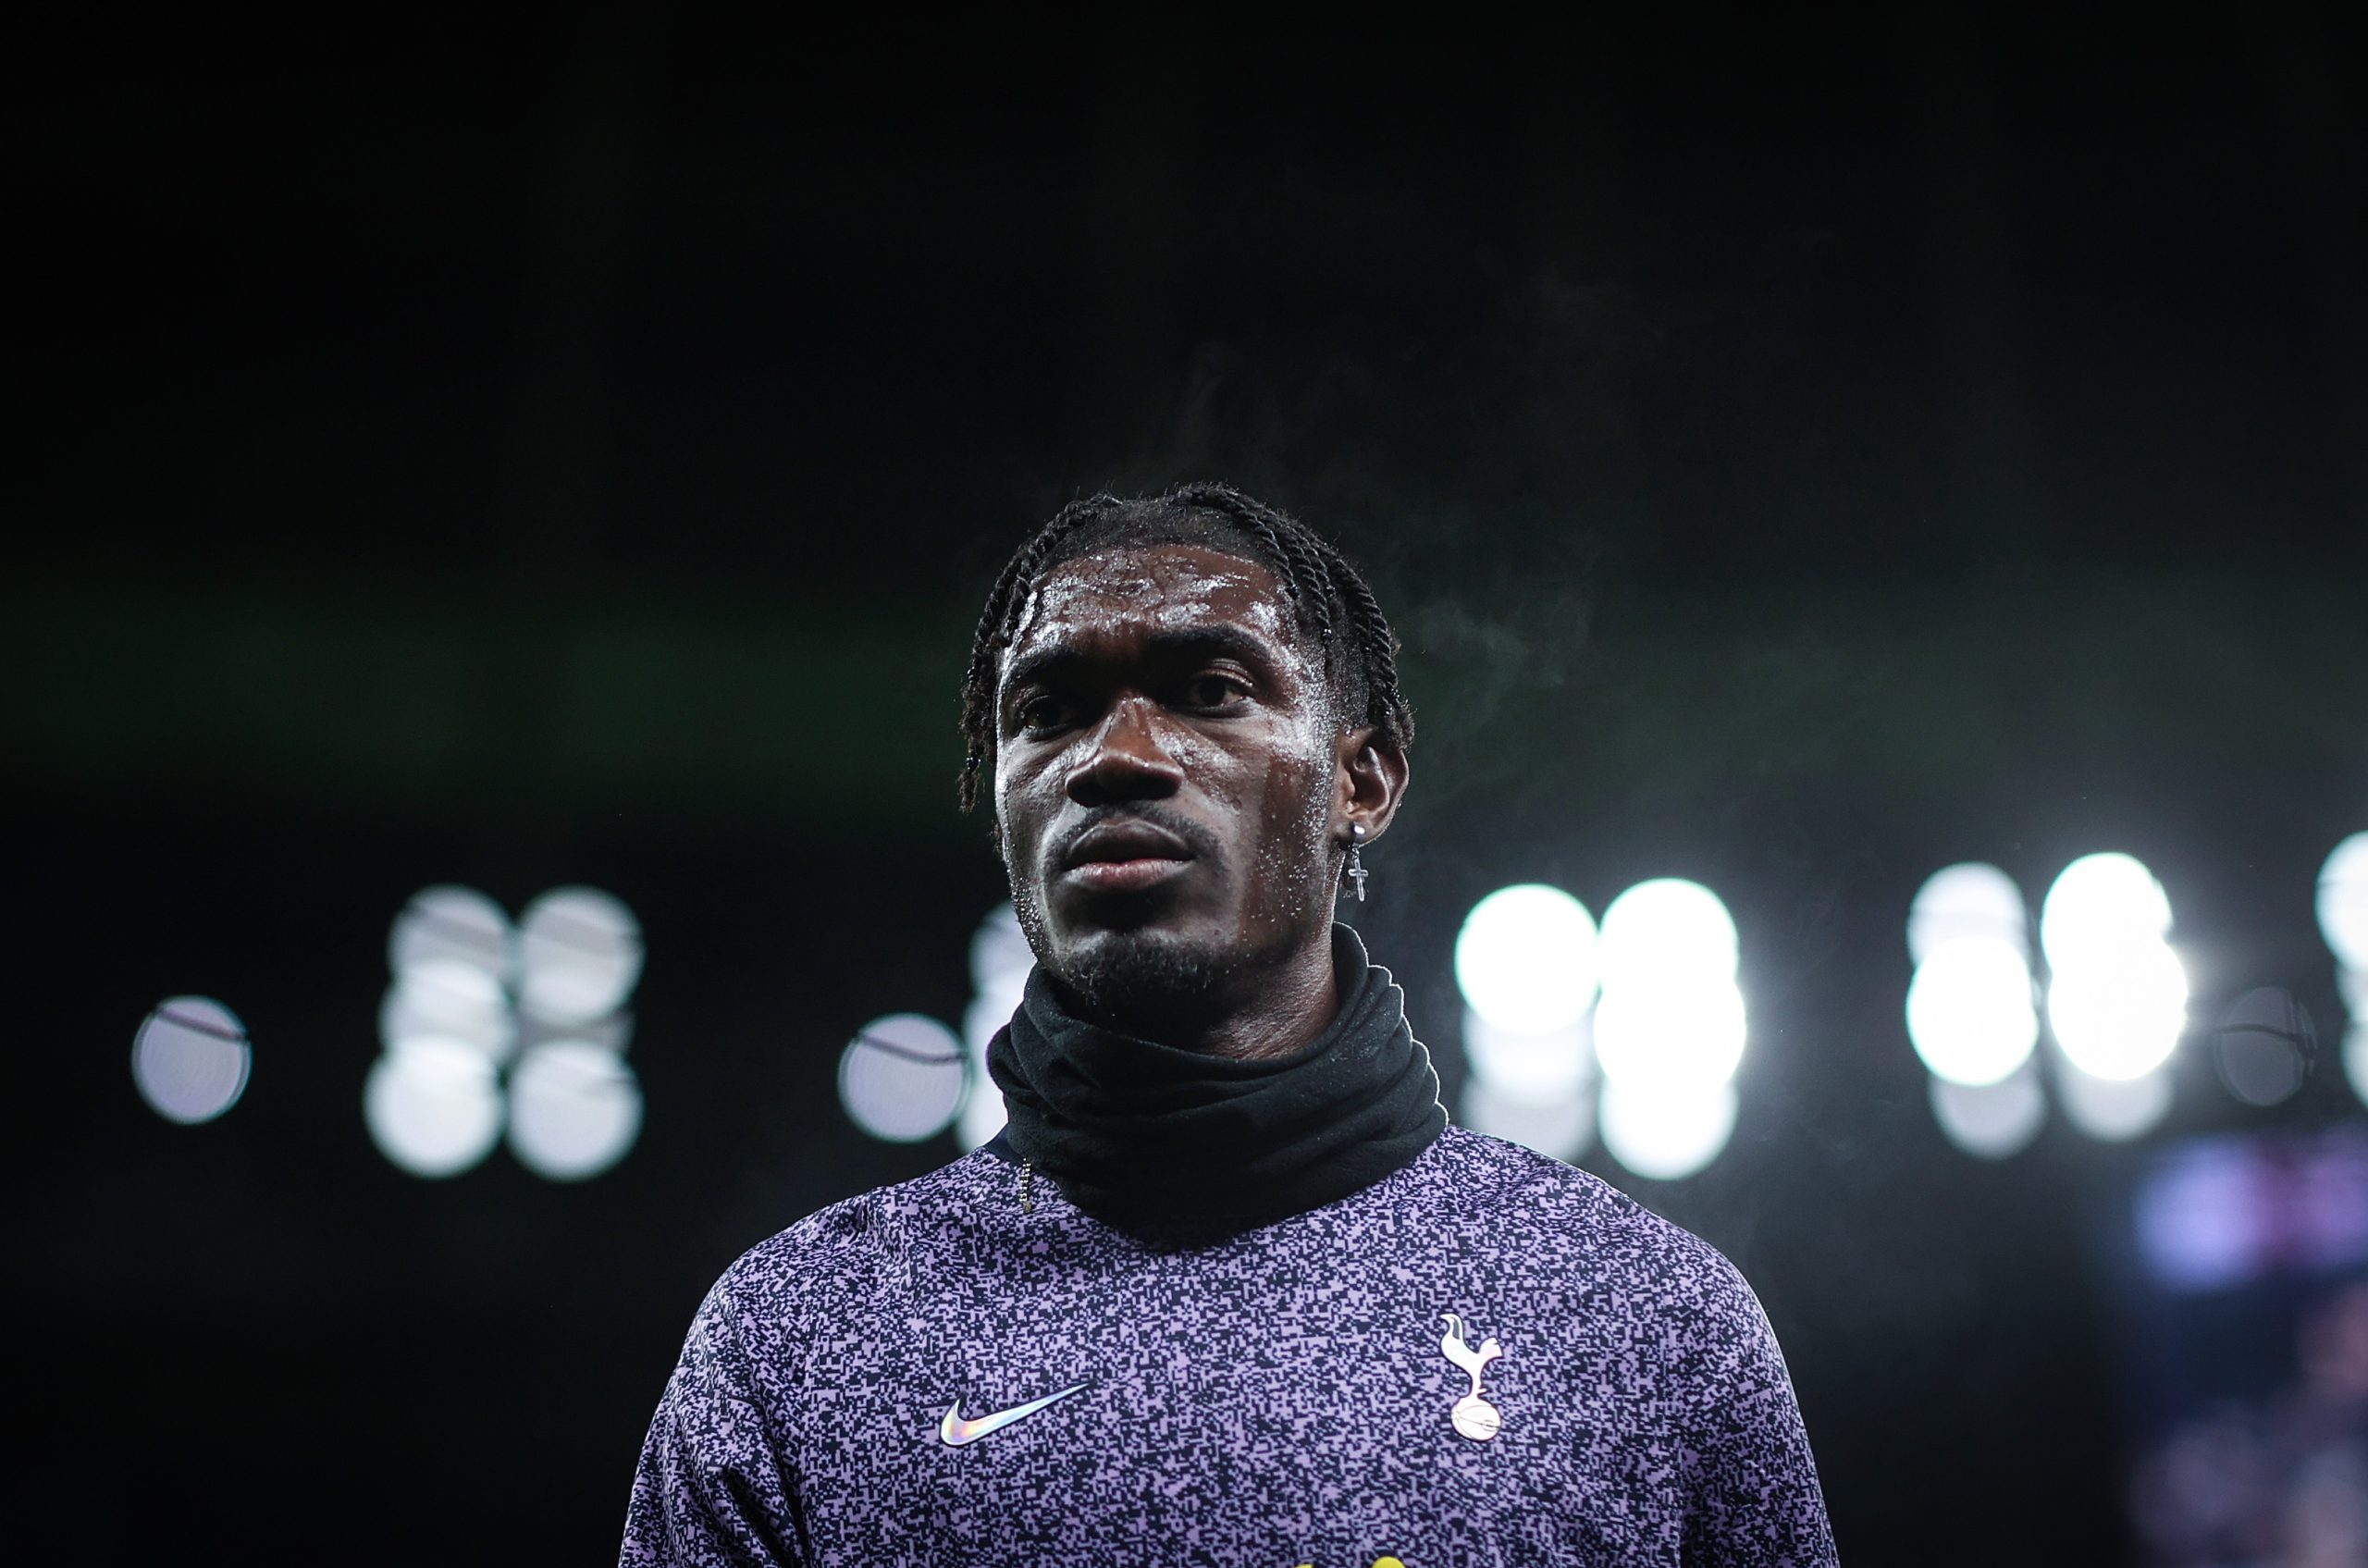 Tottenham star Bissouma snubs Arsenal and tips Manchester City for Premier League glory.